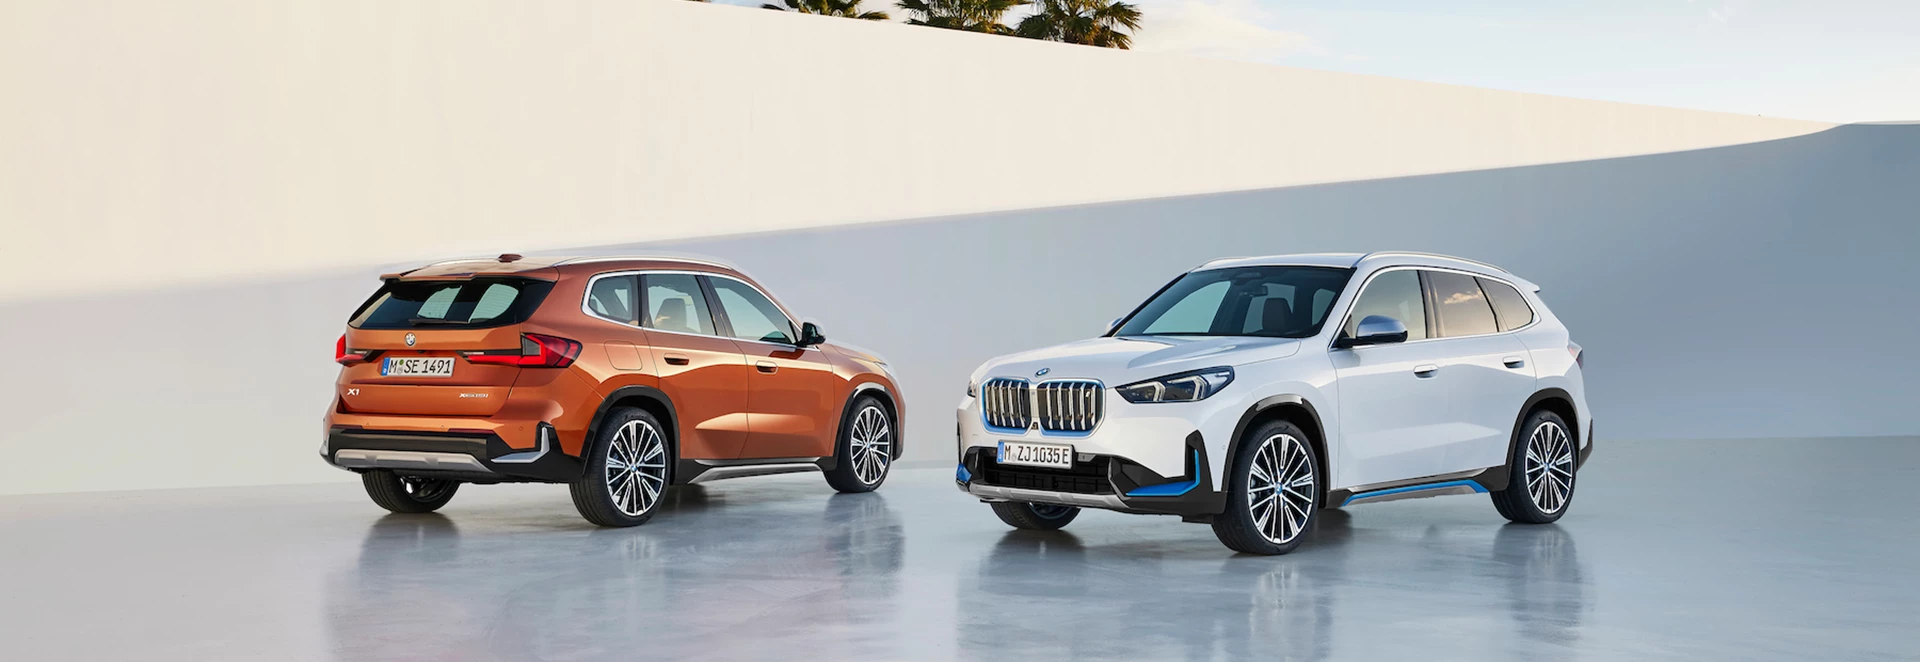 2022 BMW X1 revealed: Here’s what you need to know 